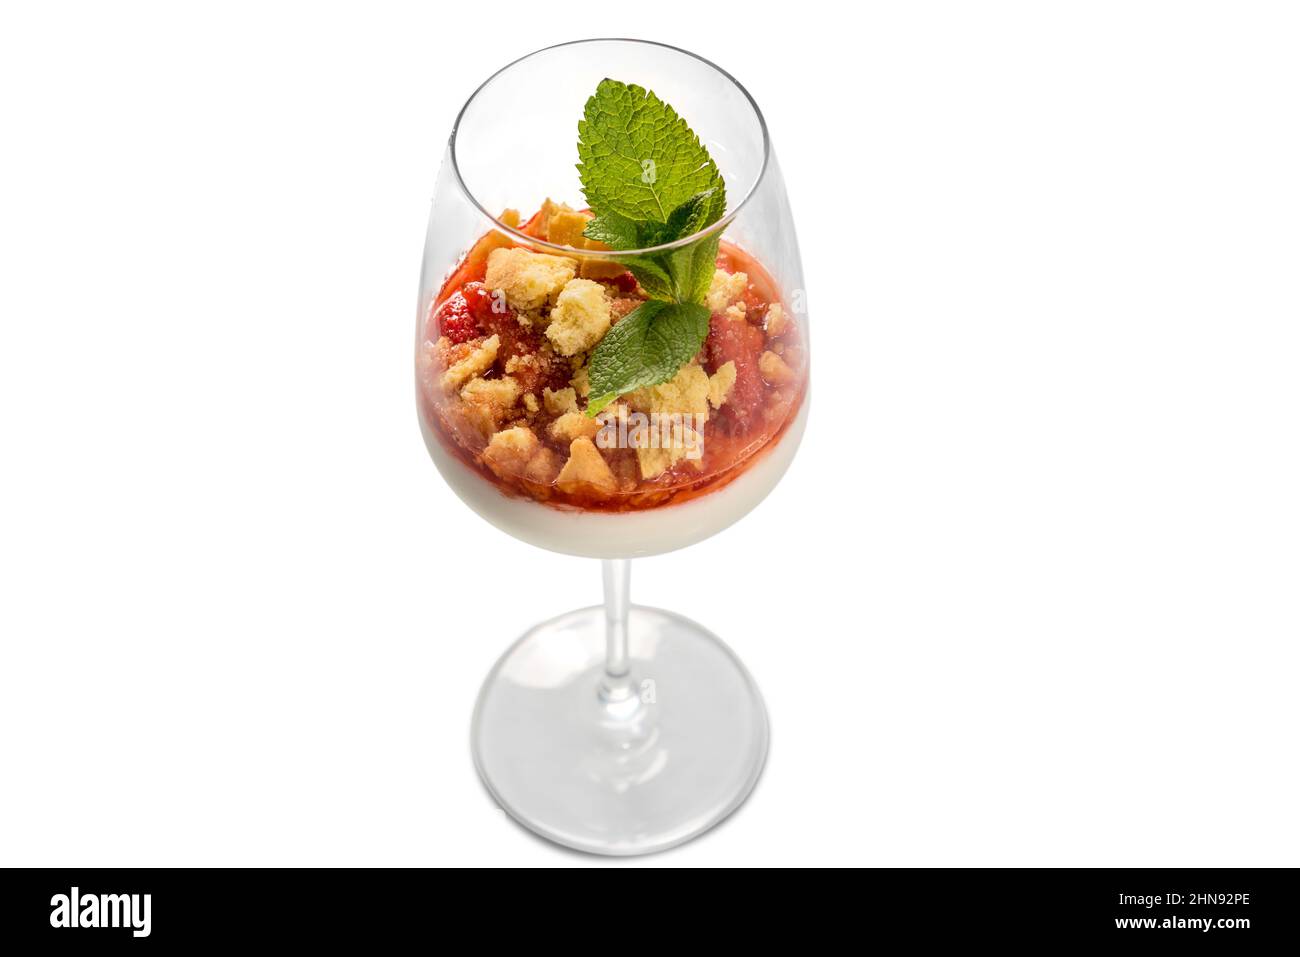 Panna cotta italian dessert with strawberry syrup and crumbled cake with mint leaves in glass goblet glass, top view, isolated on white Stock Photo